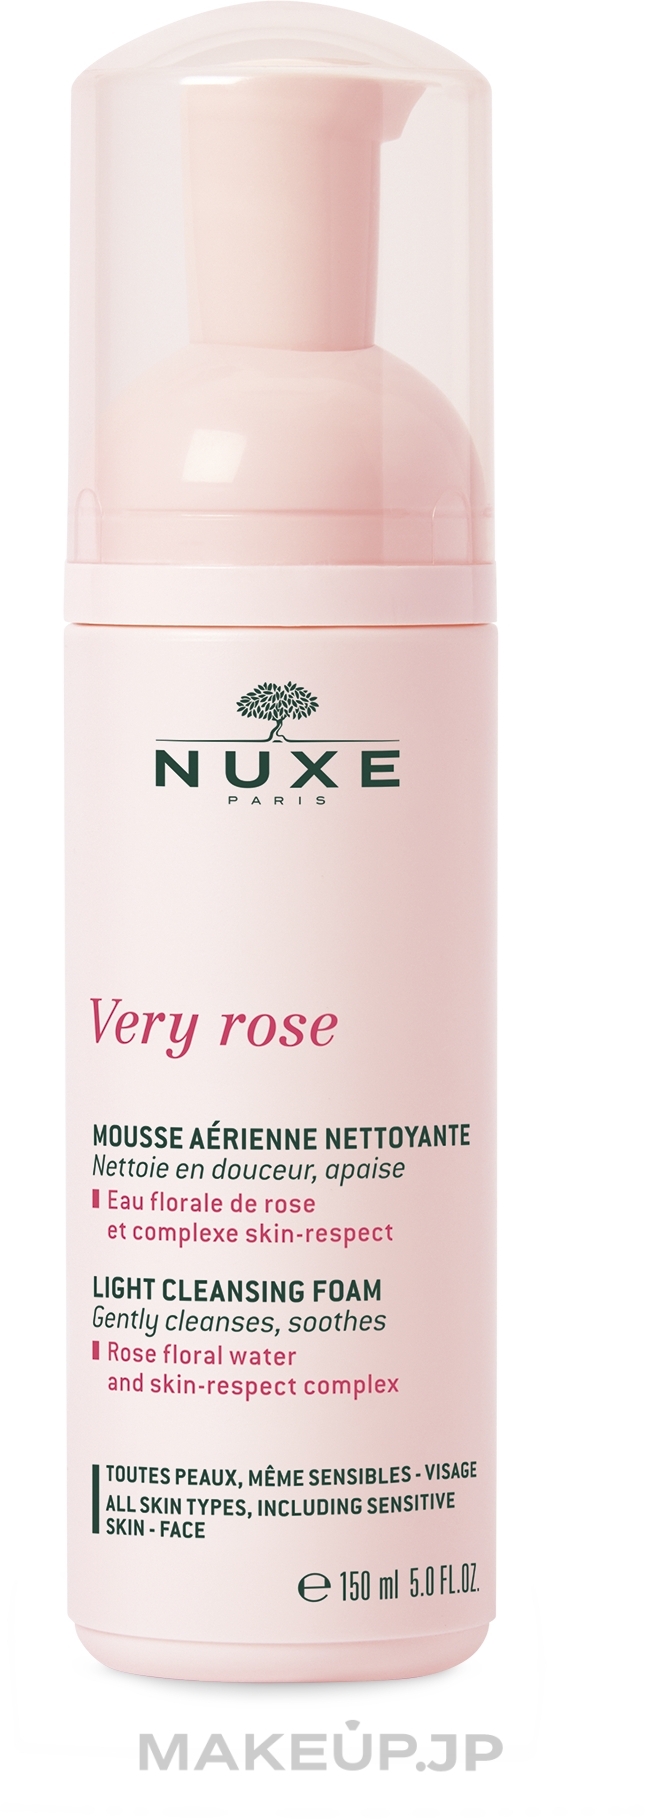 Light Cleansing Facial Foam - Nuxe Very Rose Light Cleansing Foam — photo 150 ml